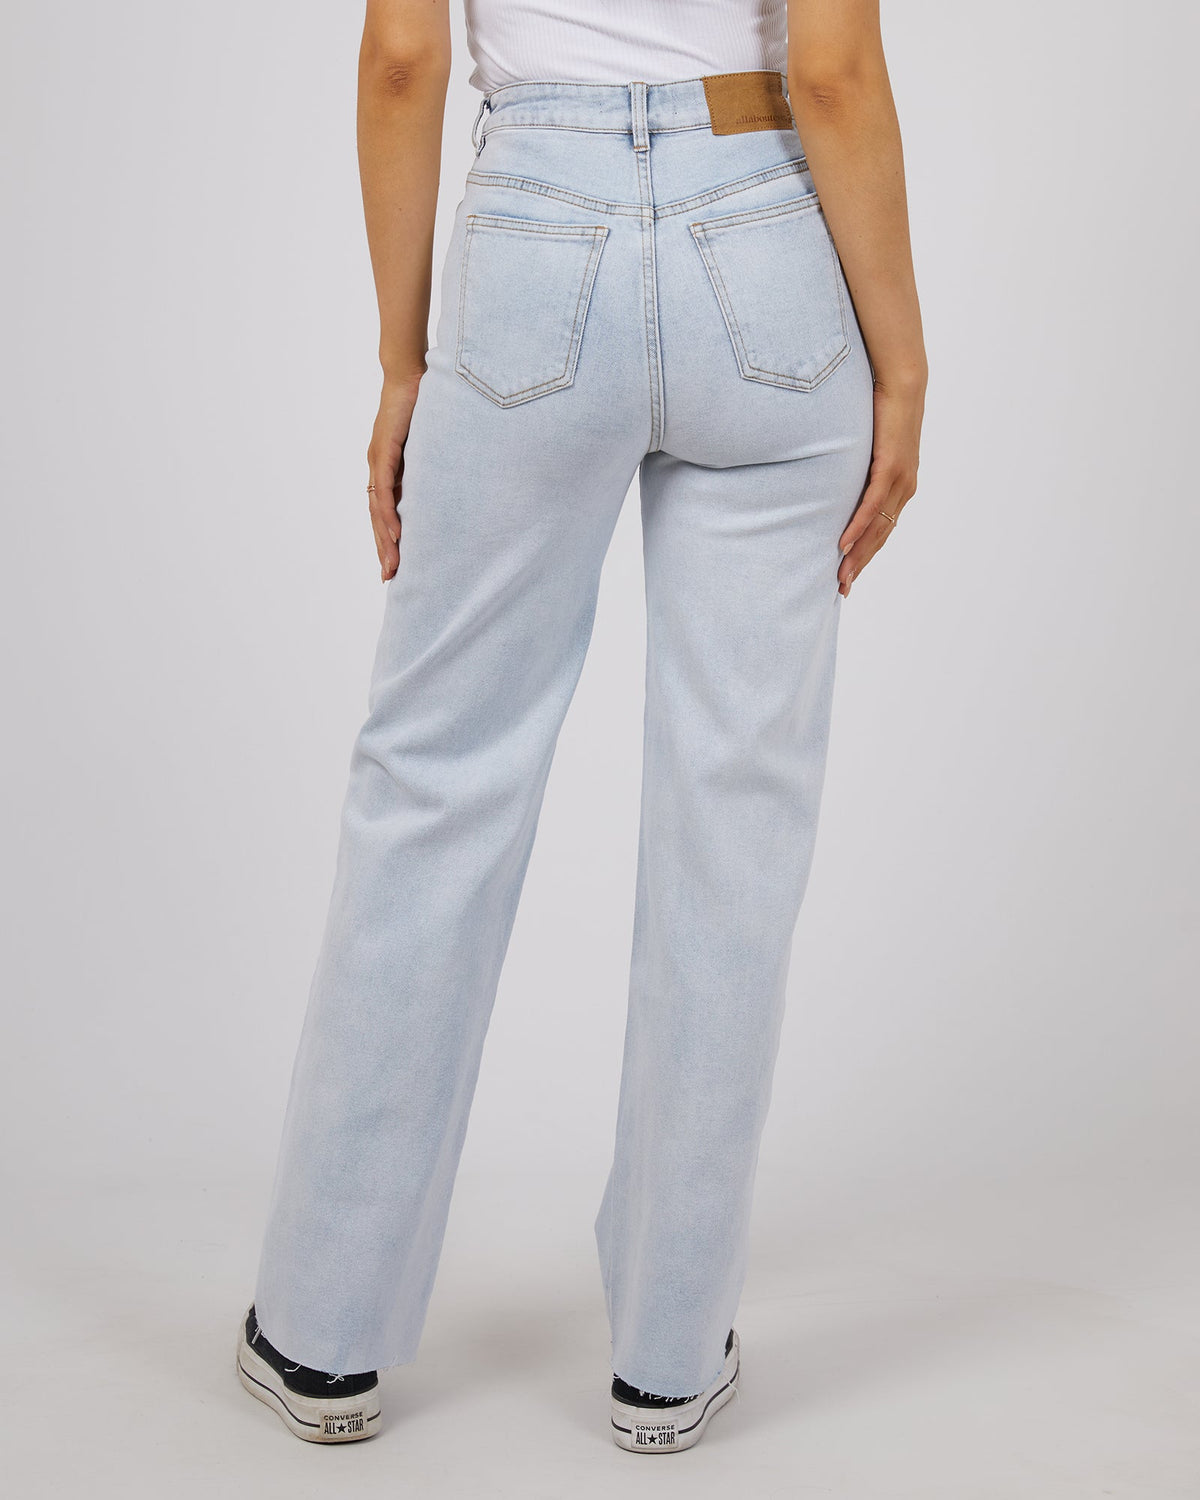 All About Eve-Skye Comfort Jean Light Blue-Edge Clothing